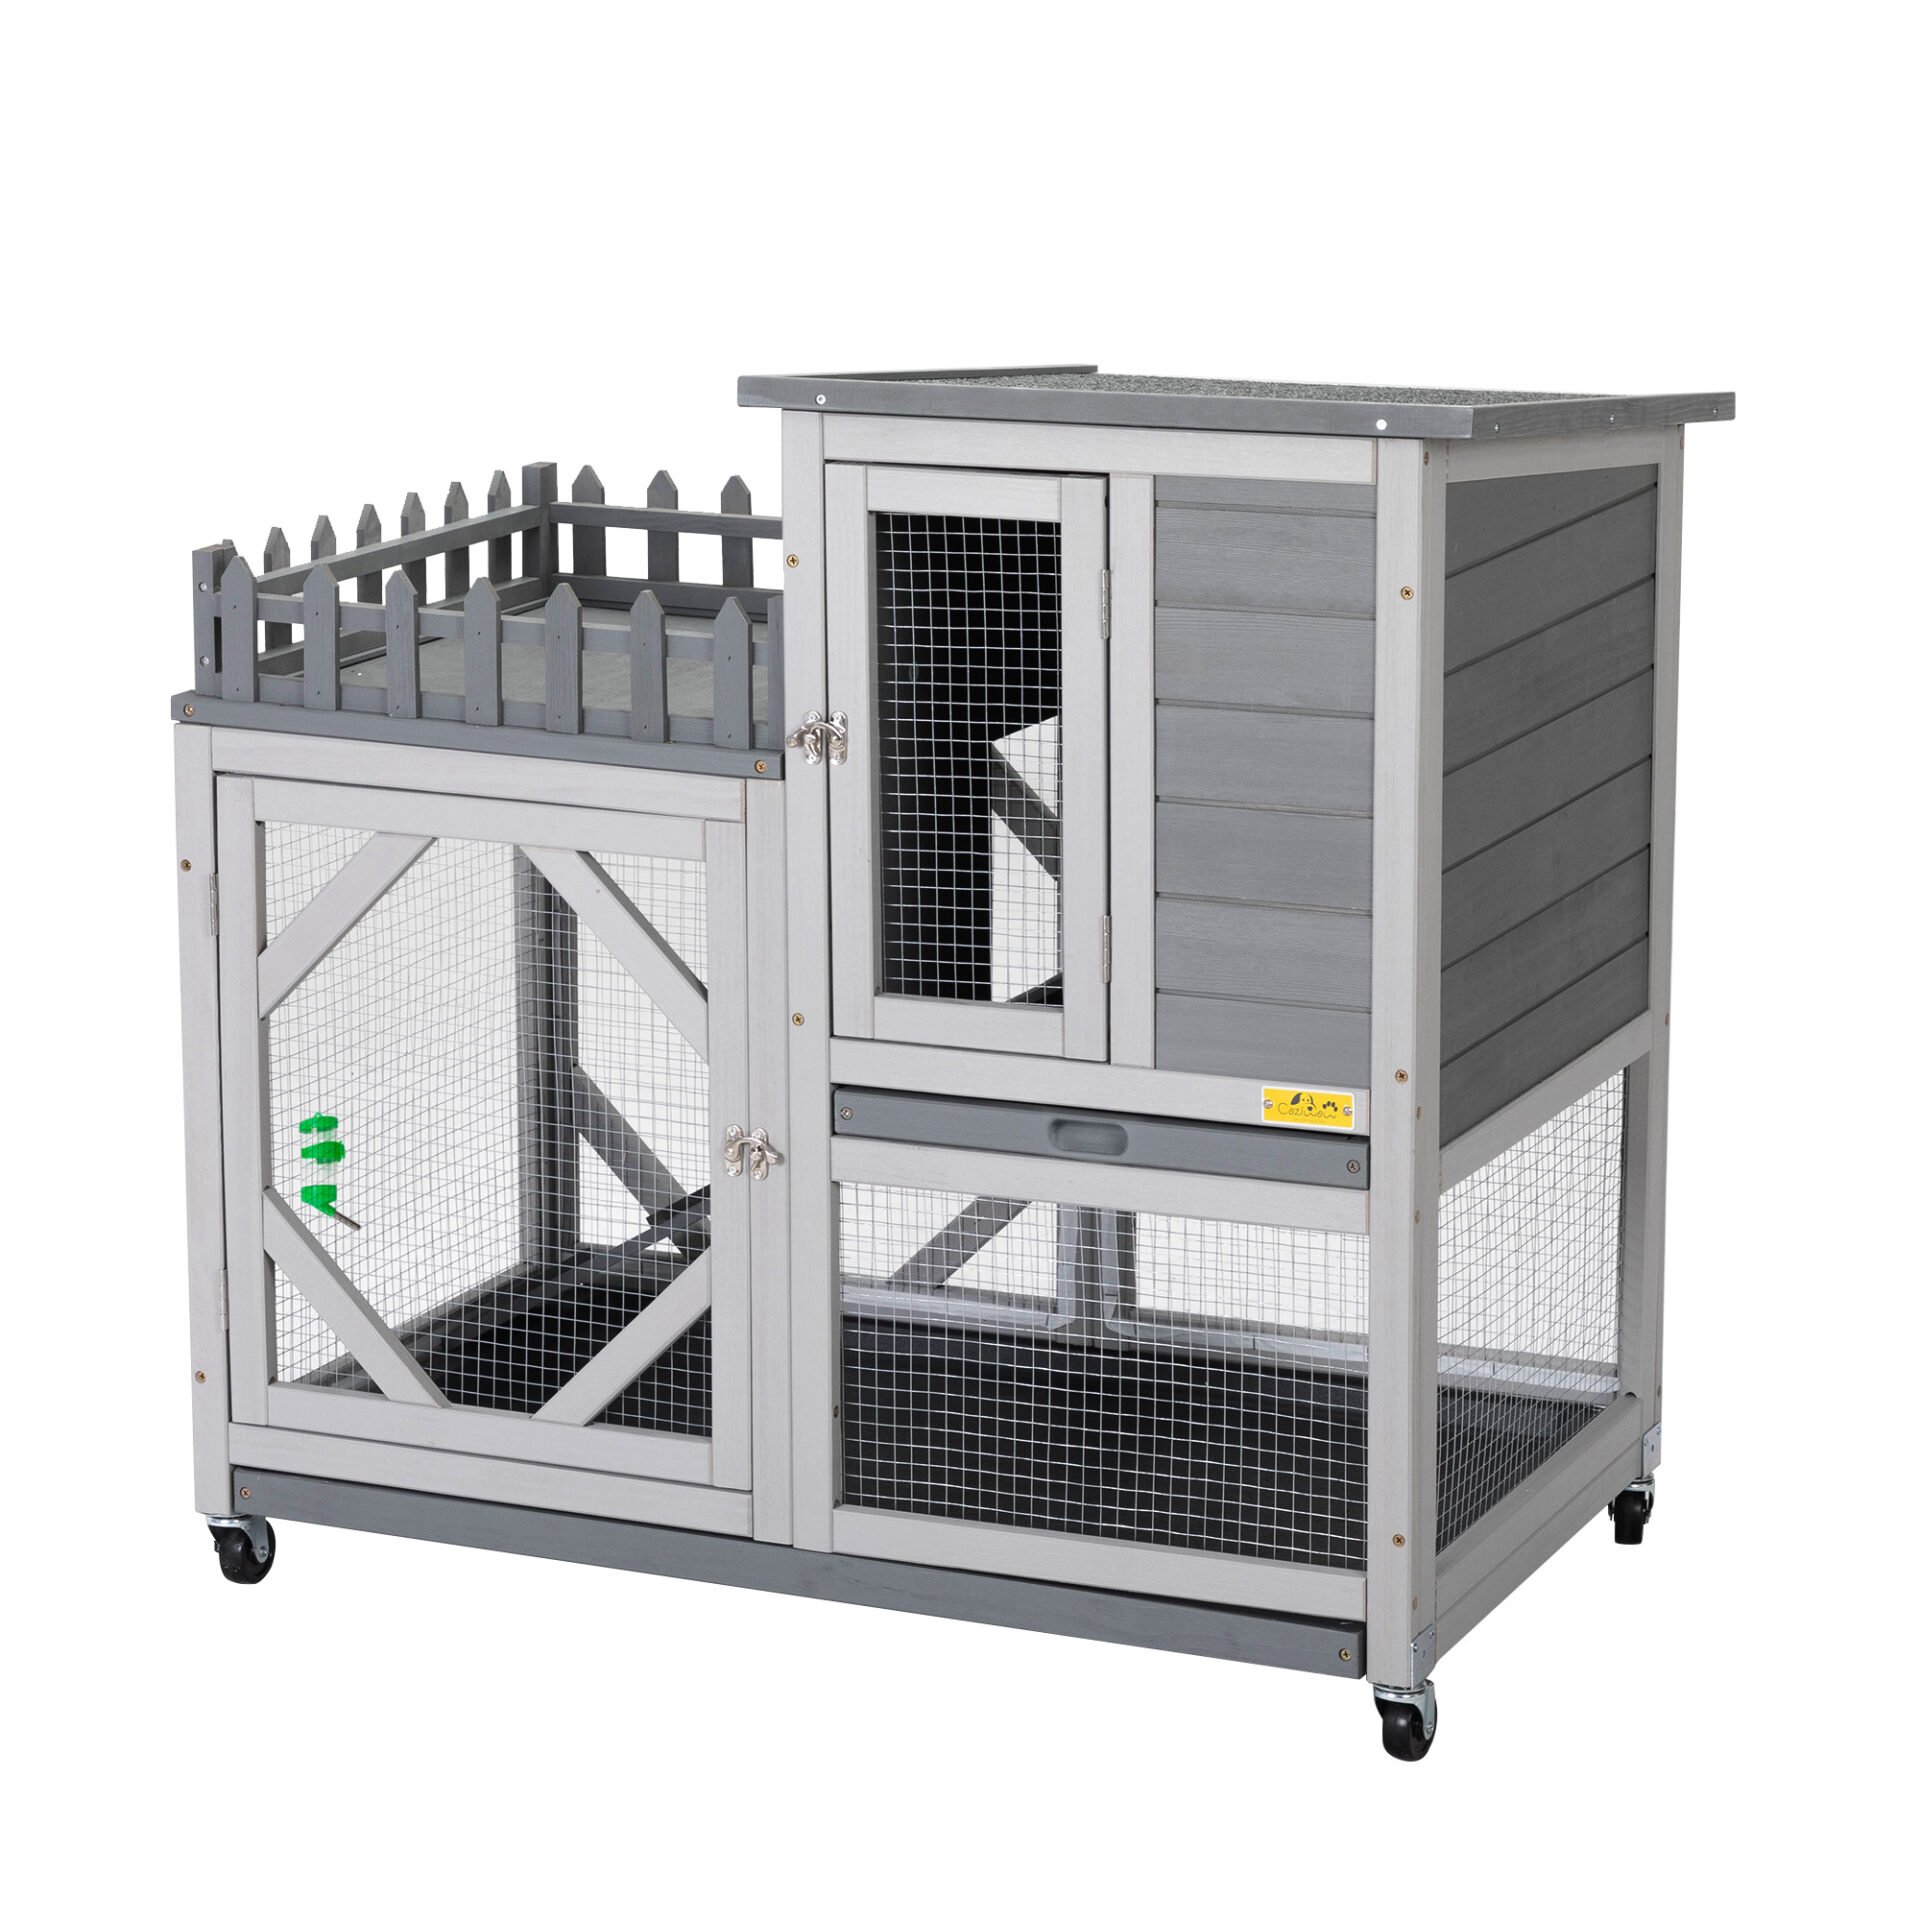 Coziwow Large 3 Story Rabbit Hutch Bunny Cage with Openable Roof, 4 Wheels, Water Bottle and Pull-Out Tray, for 2 Rabbits, Gray CW12A0504 2